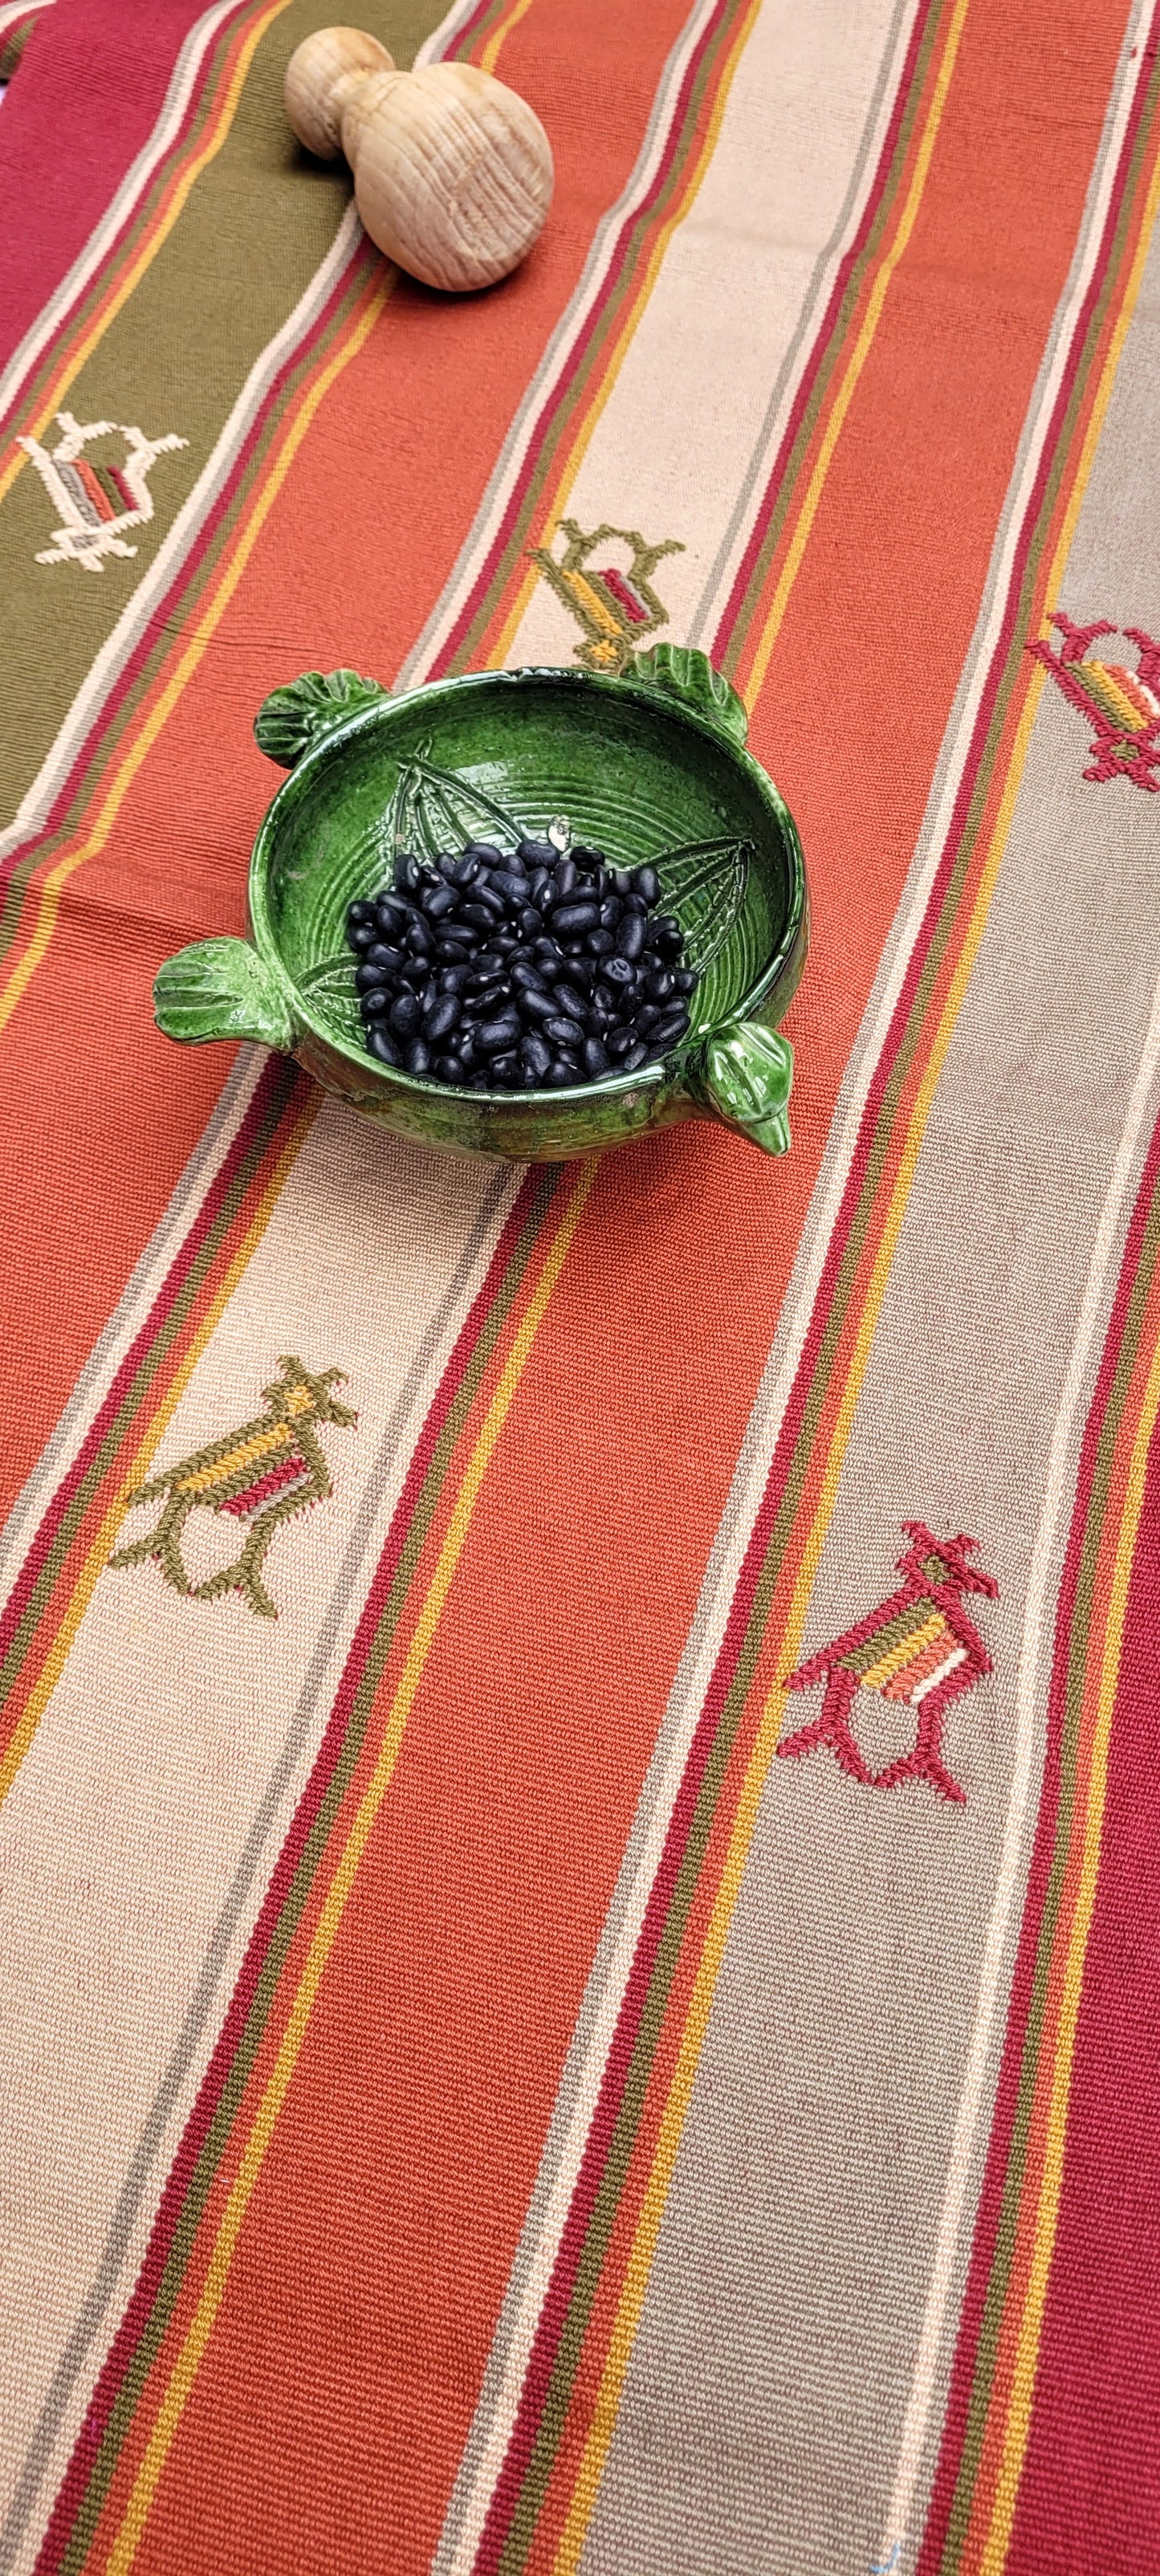 Handwoven Cotton Scarf/Table runner